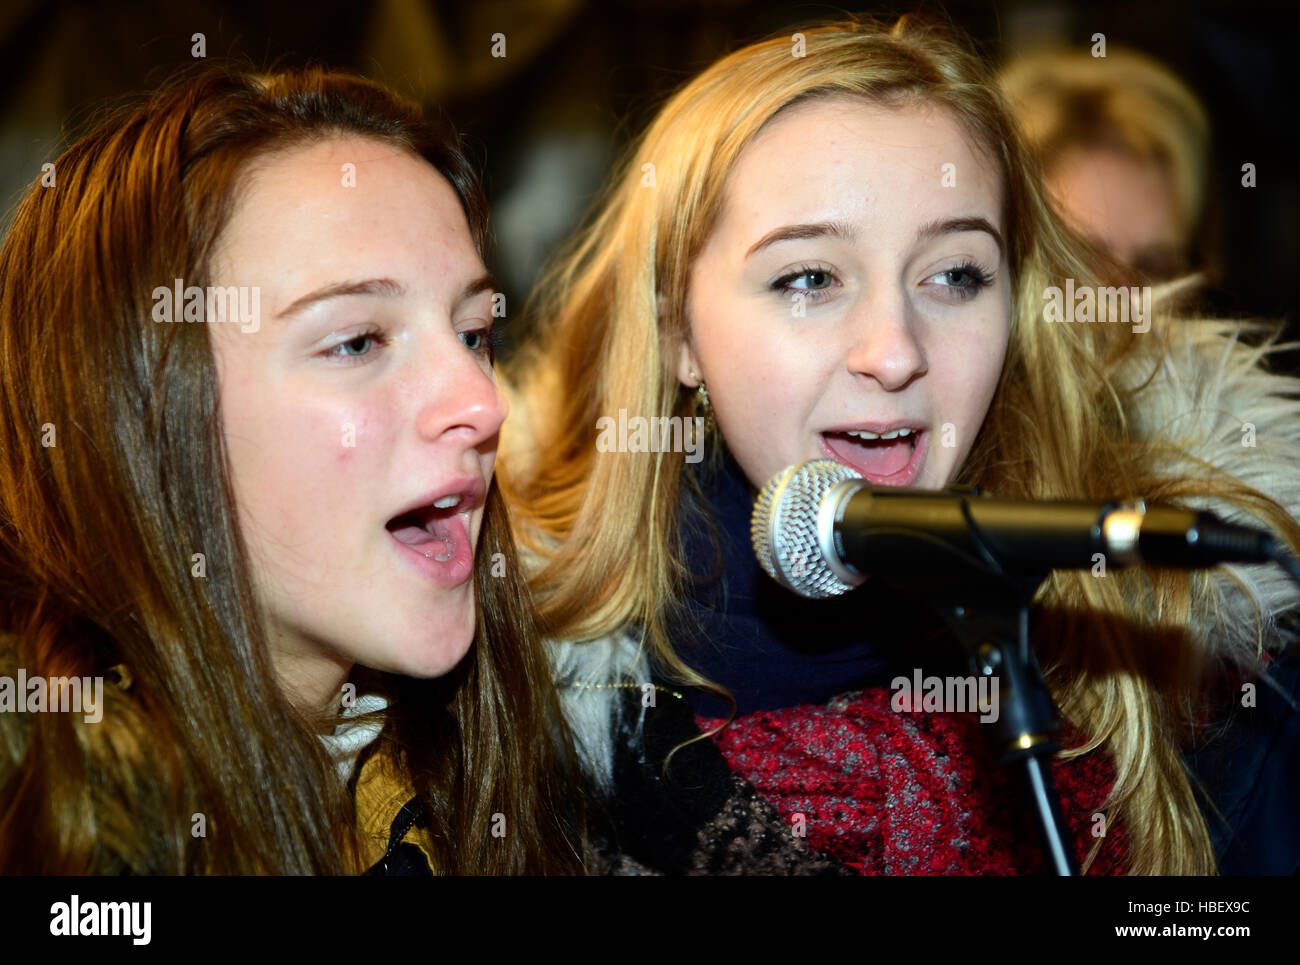 Members of a local singing group performing at an outdoor Christmas Market, Grayshott, Hampshire, UK. Stock Photo